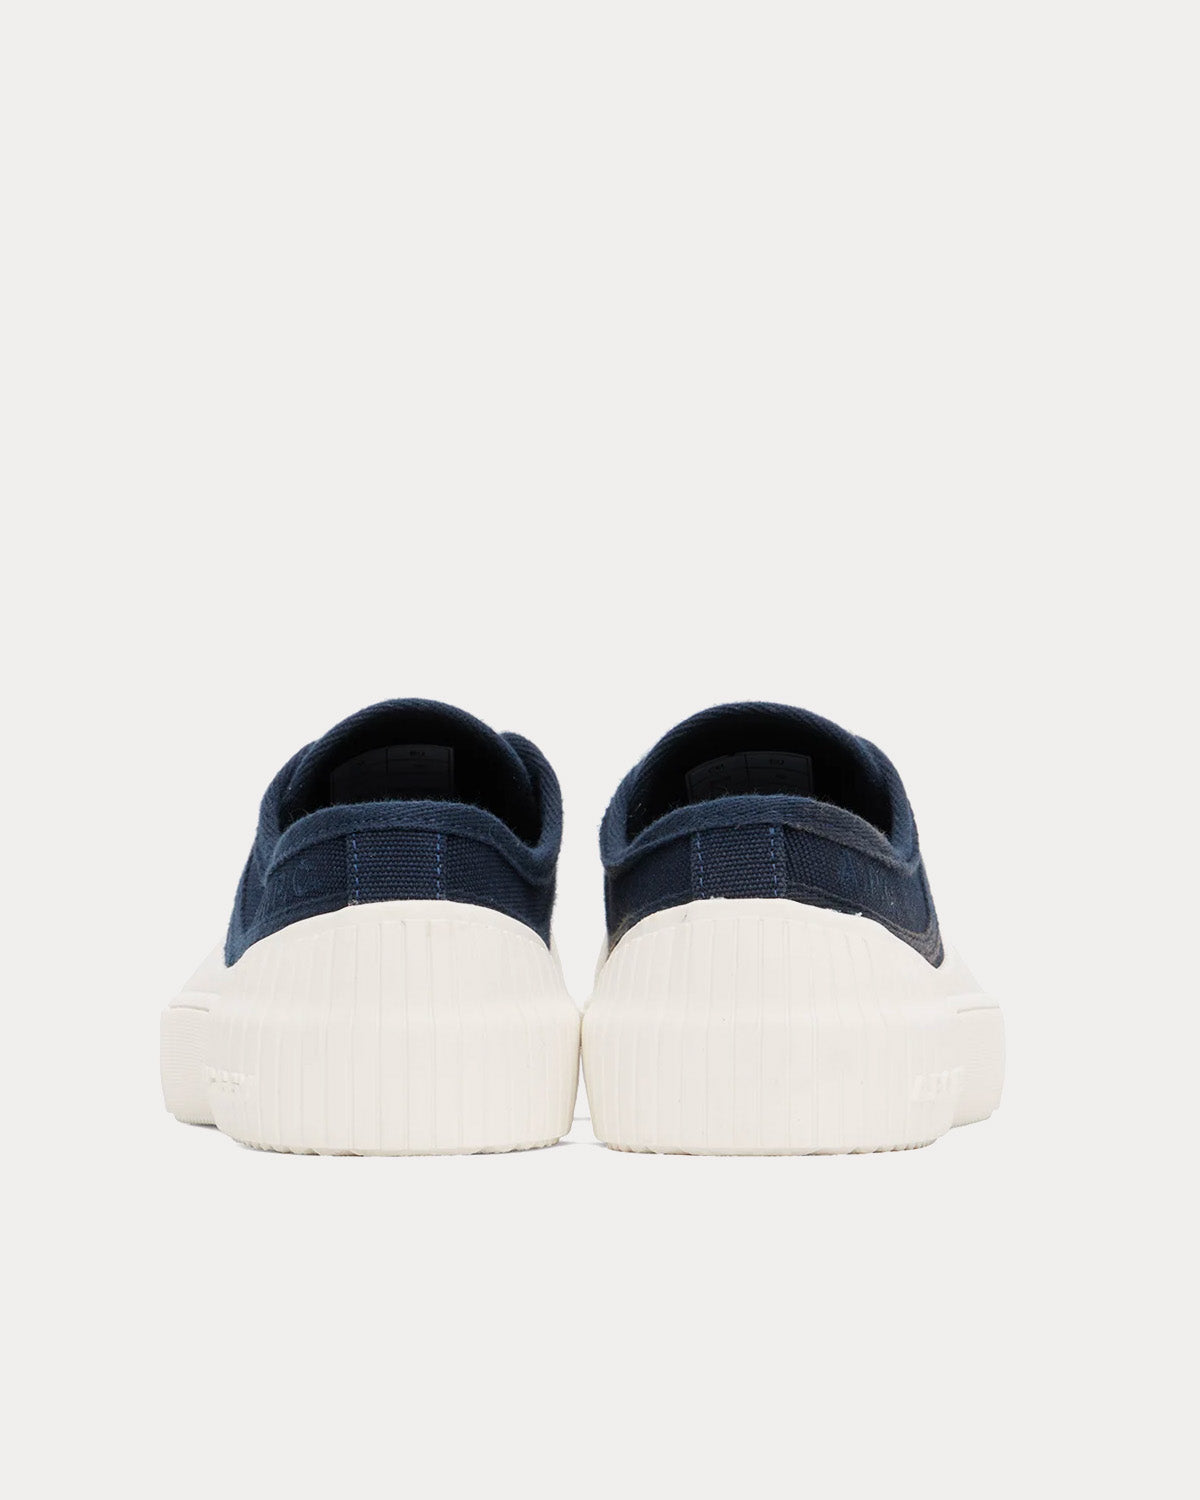 A.P.C. - Iggy Basse Navy Low Top Sneakers